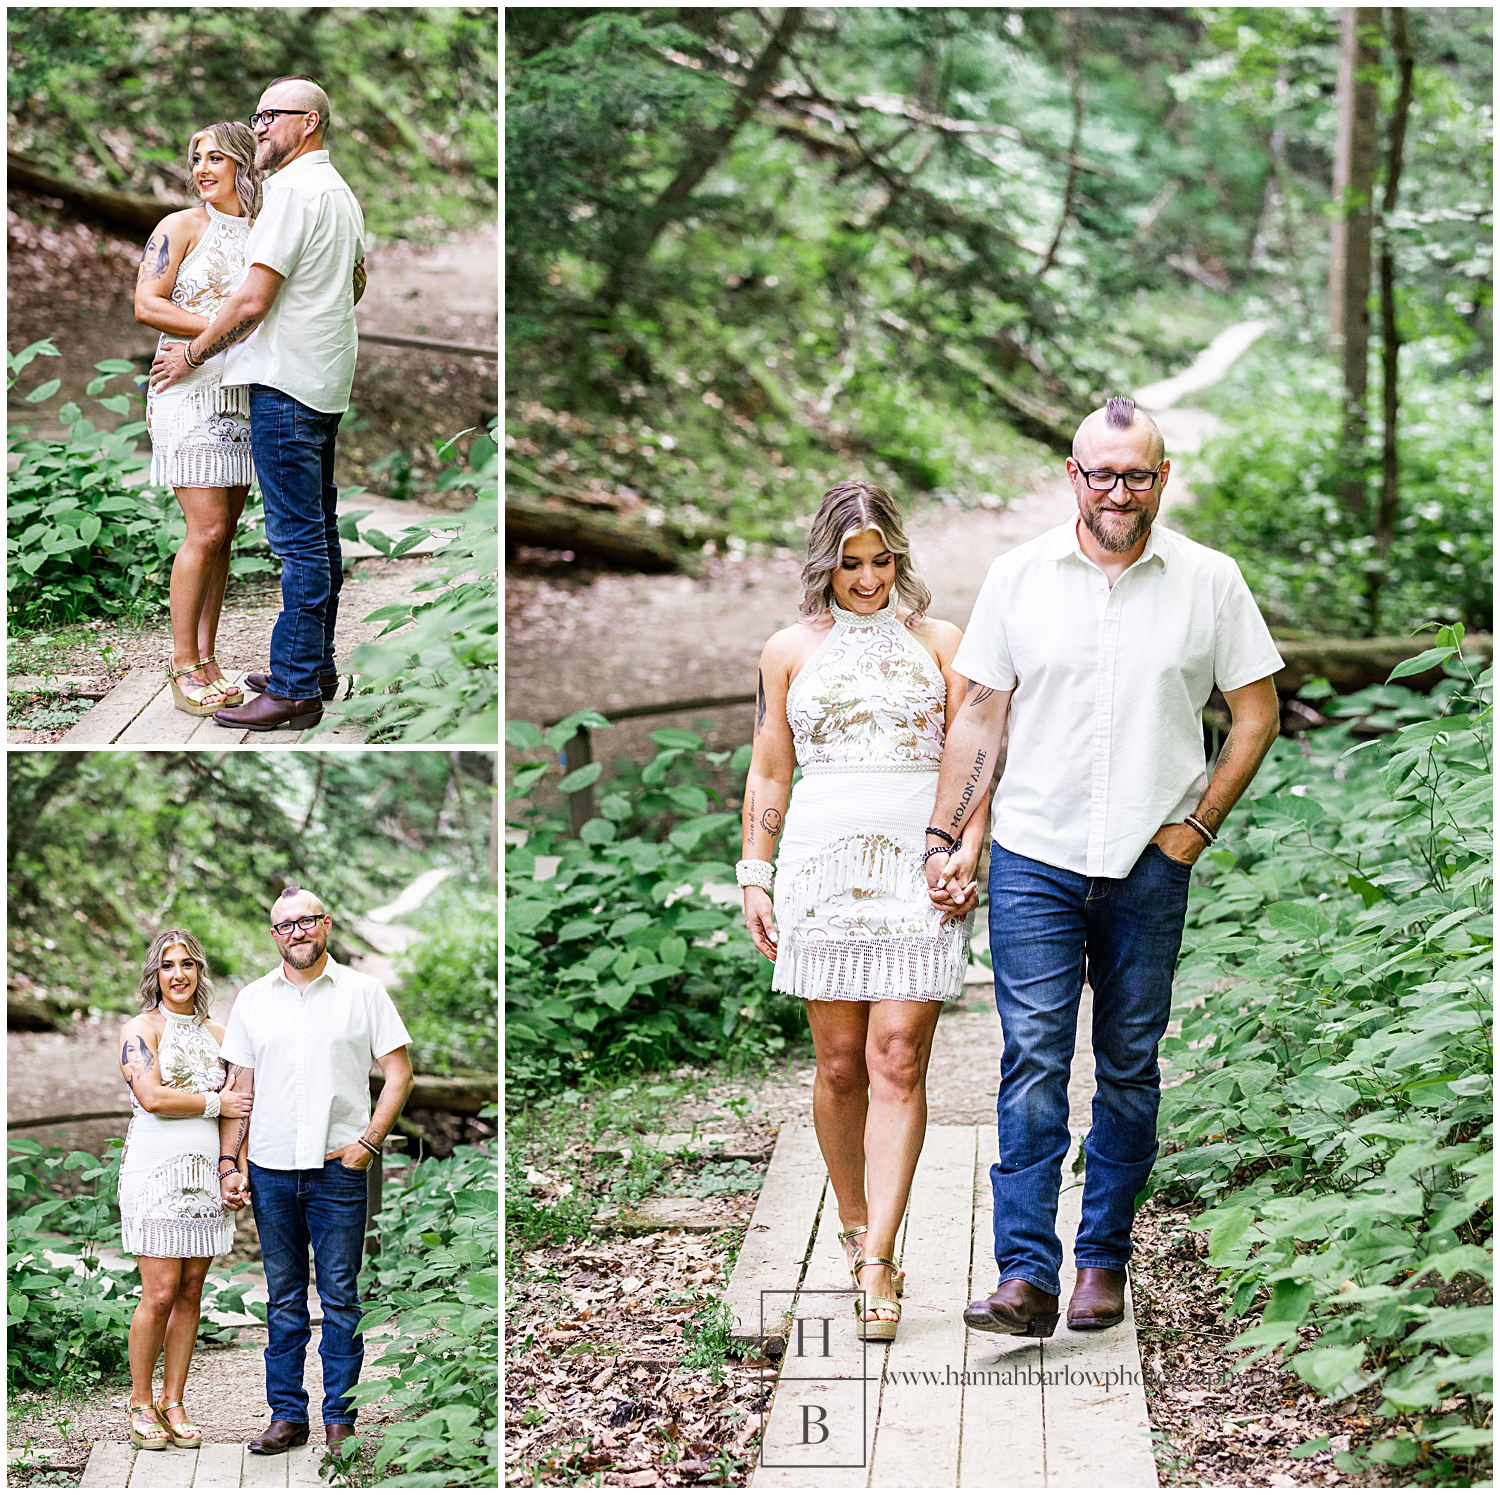 Couple walks on wooden bridge for engagement photos in forest.